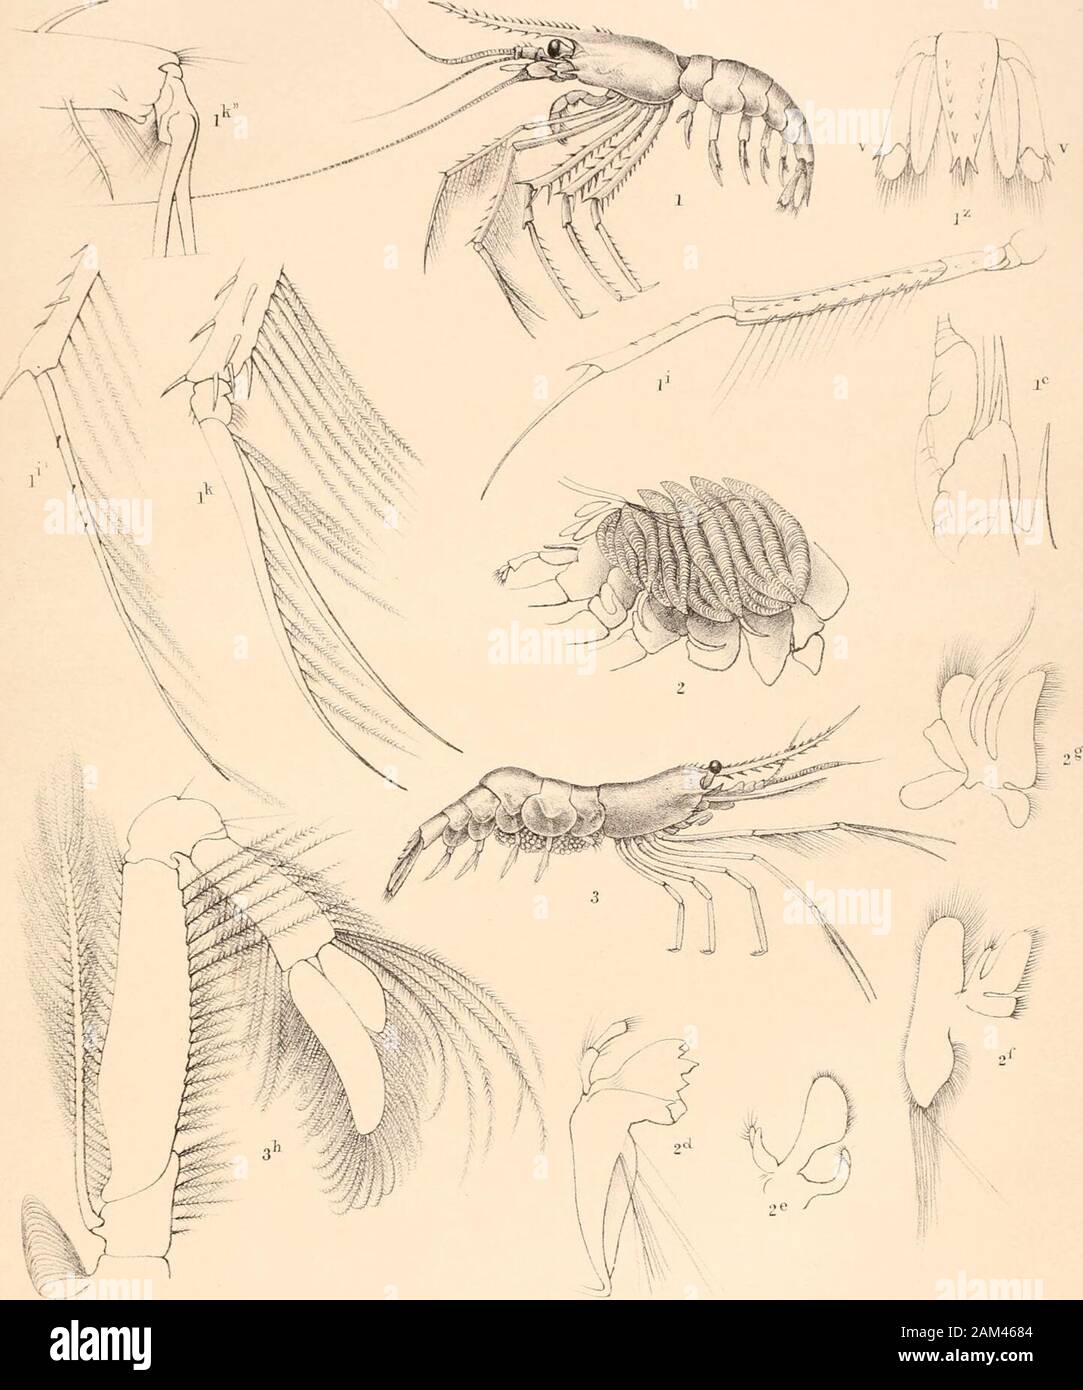 Report on the scientific results of the voyage of H.M.SChallenger during the years 1873-76 : under the command of Captain George SNares, R.N., F.R.Sand Captain Frank Turle Thomson, R.N. . i1 nal J.CRichards lith. I HYMENODORA CLAUCA.2. DO MOLLICUTIS. fianiiai^t. imp PLATE CXXXVIII. PLATE CXXXVIII. Stylodactylus discissipes (p. 851).Fig. 1. Lateral view of male ; enlarged twice. lc. Second antenna ; peduncle and part of frontal margin. i. Second gnathopod ; li, dactylos. Ik. First pereiopod. Ik. First pereiopod ; articulation of chela reversed. lvzv. Rhipidura. Stylodactylus orientalis (p. 854 Stock Photo